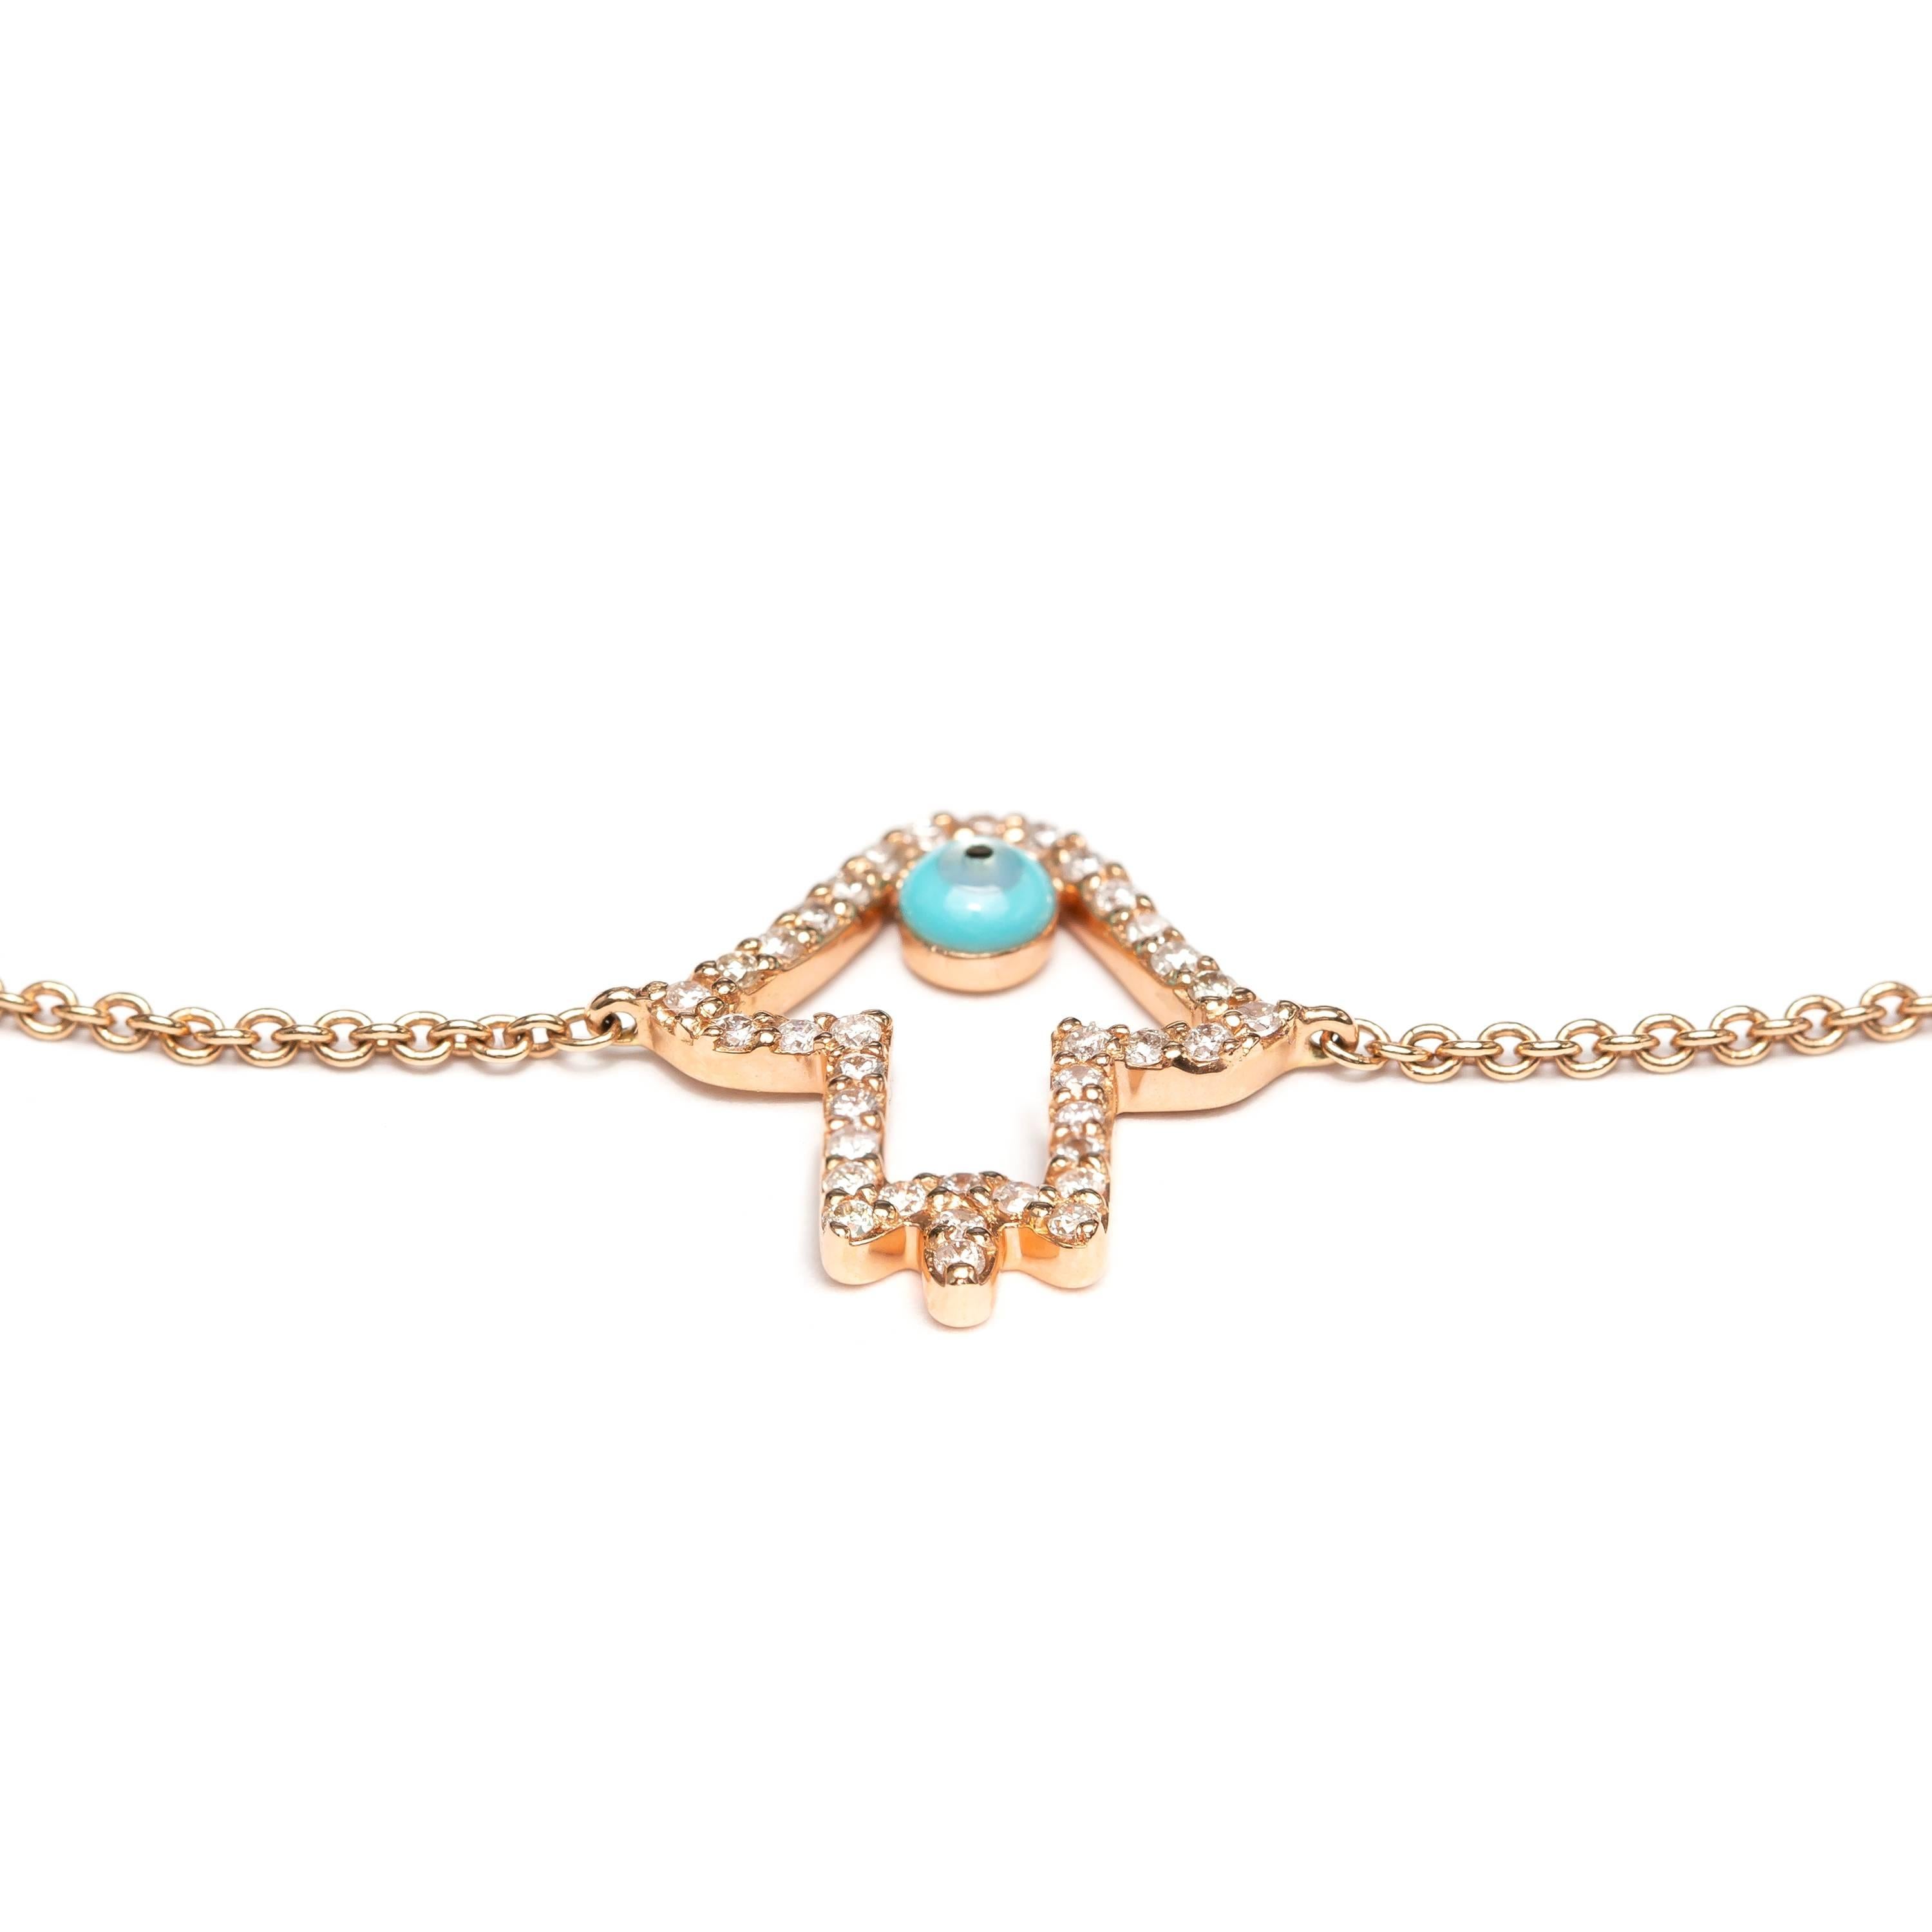 This luxurious Diamond Khamsa bracelet shimmers stunningly when it catches the light, featuring 0.25ct Round Brilliant H-SI1 Diamonds, this bracelet represents the ancient universal symbol of the evil eye, said to protect the wearer from any evil